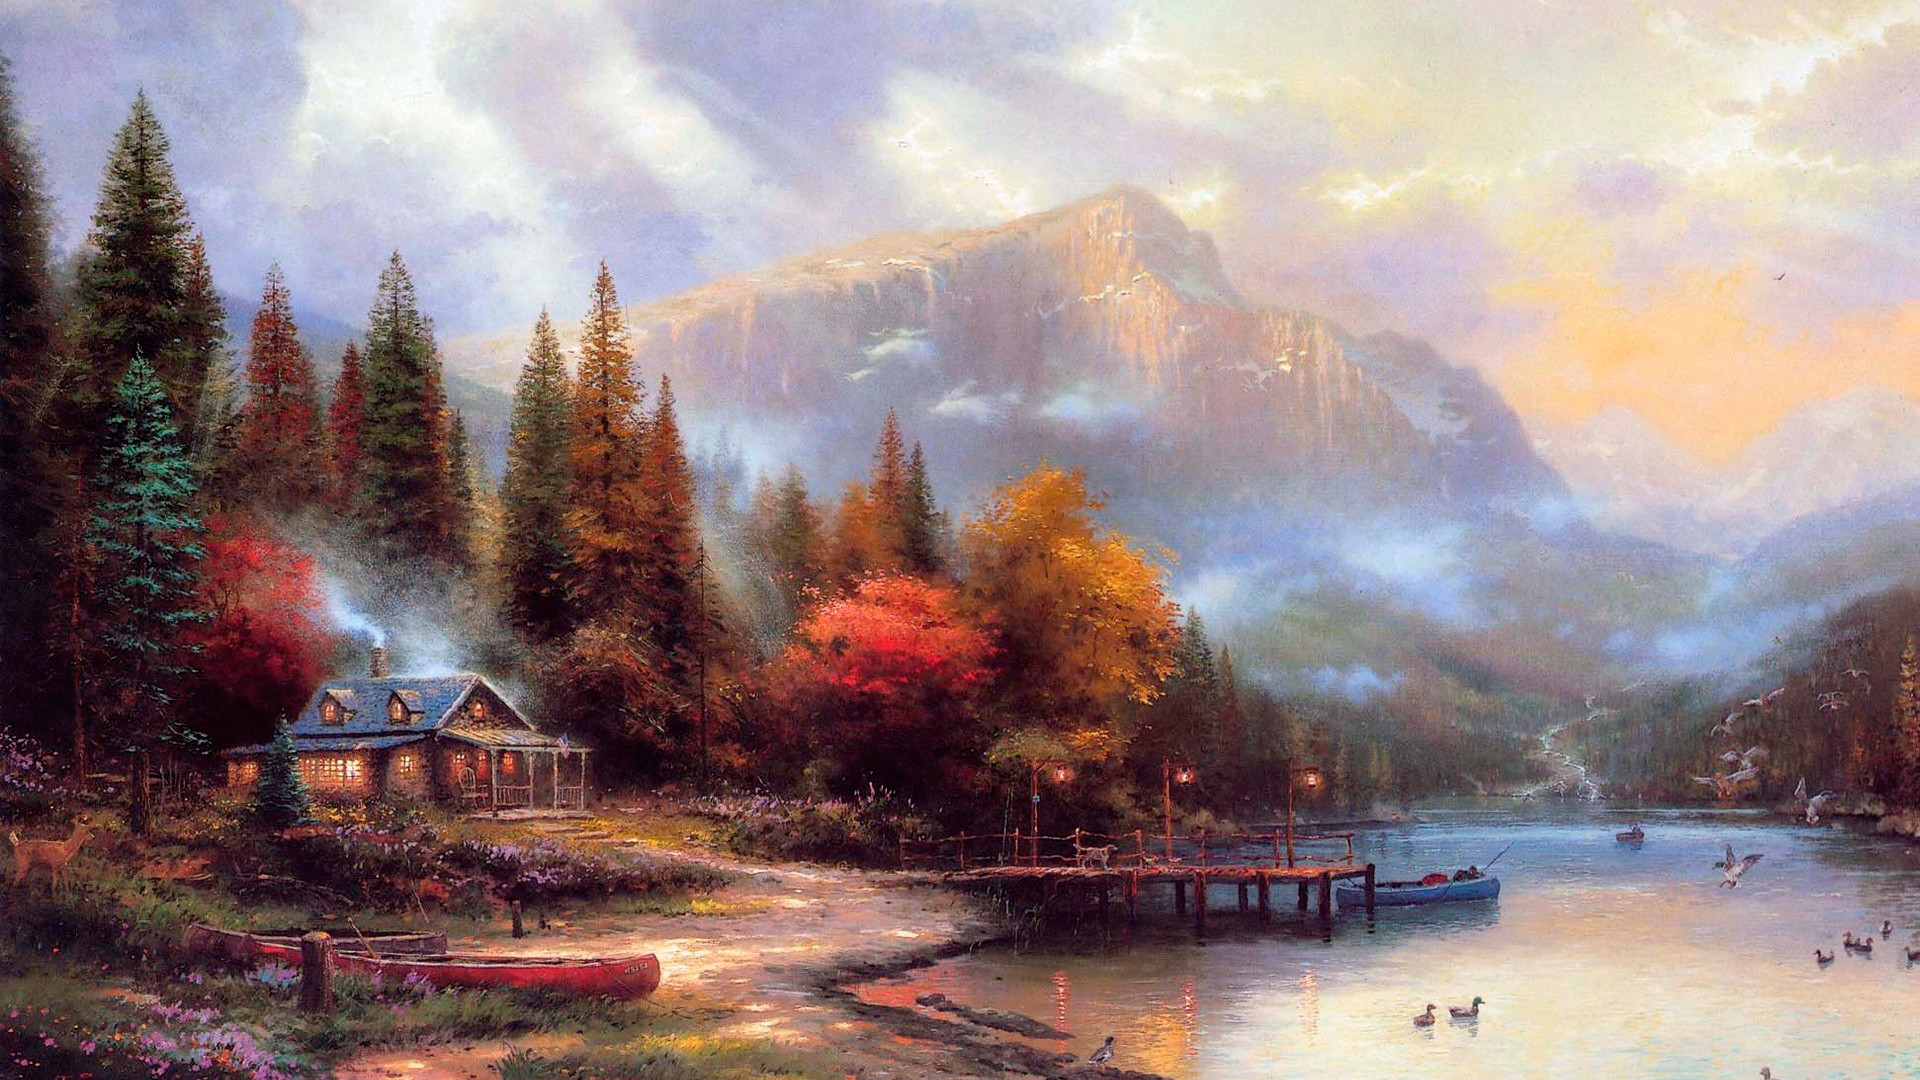 best images about The Painter Of Light Thomas Kinkade on